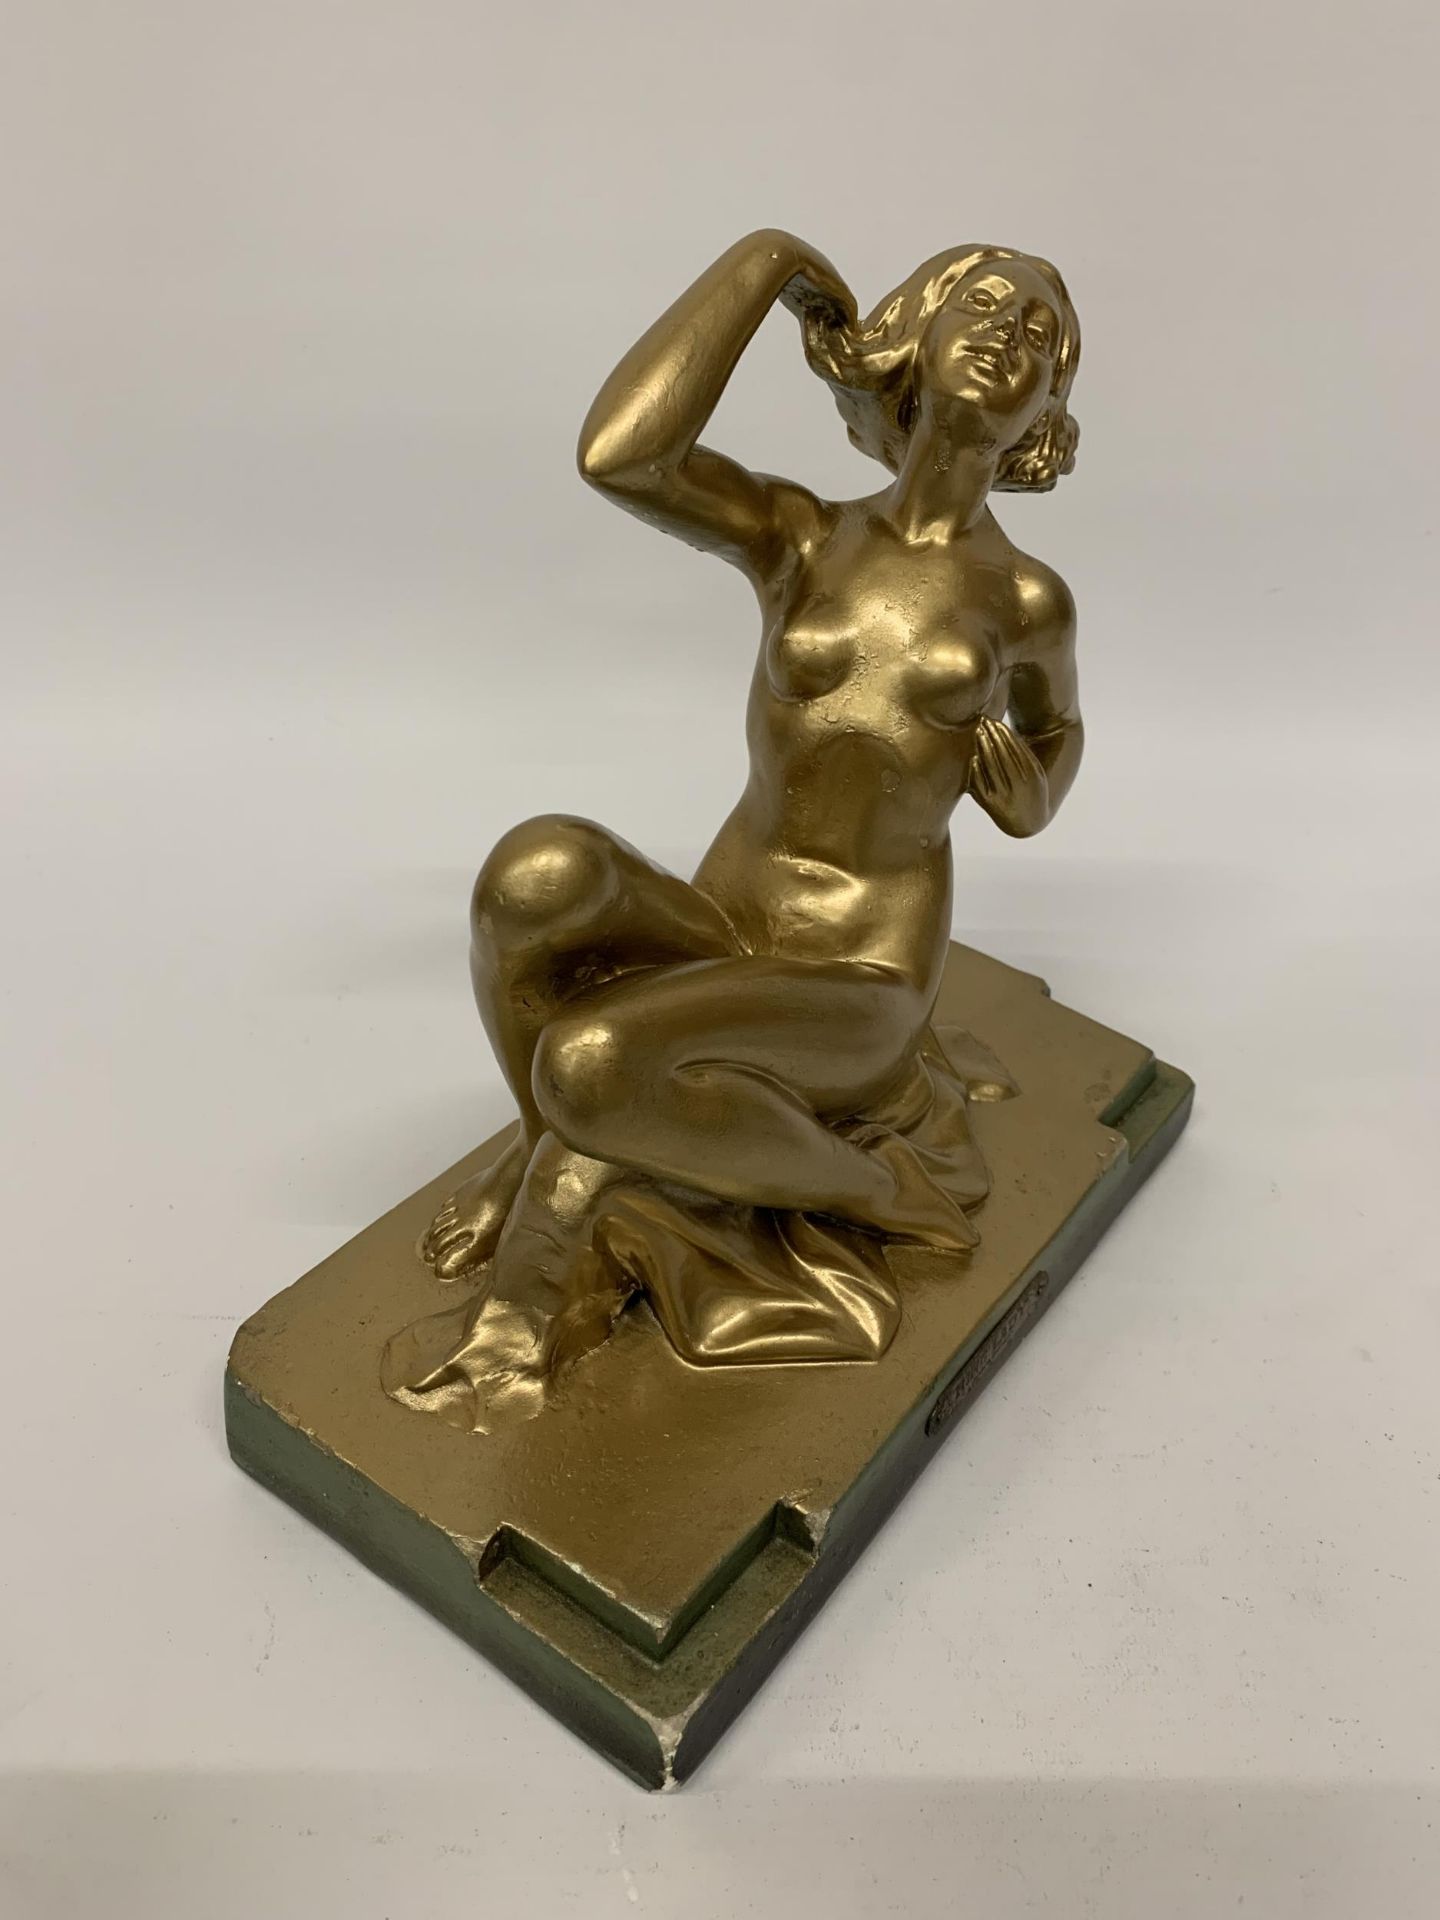 A METAL ART DECO STYLE GOLD COLOURED FIGURE 'RING LADY' HEIGHT 23CM, LENGTH 24CM - Image 2 of 6